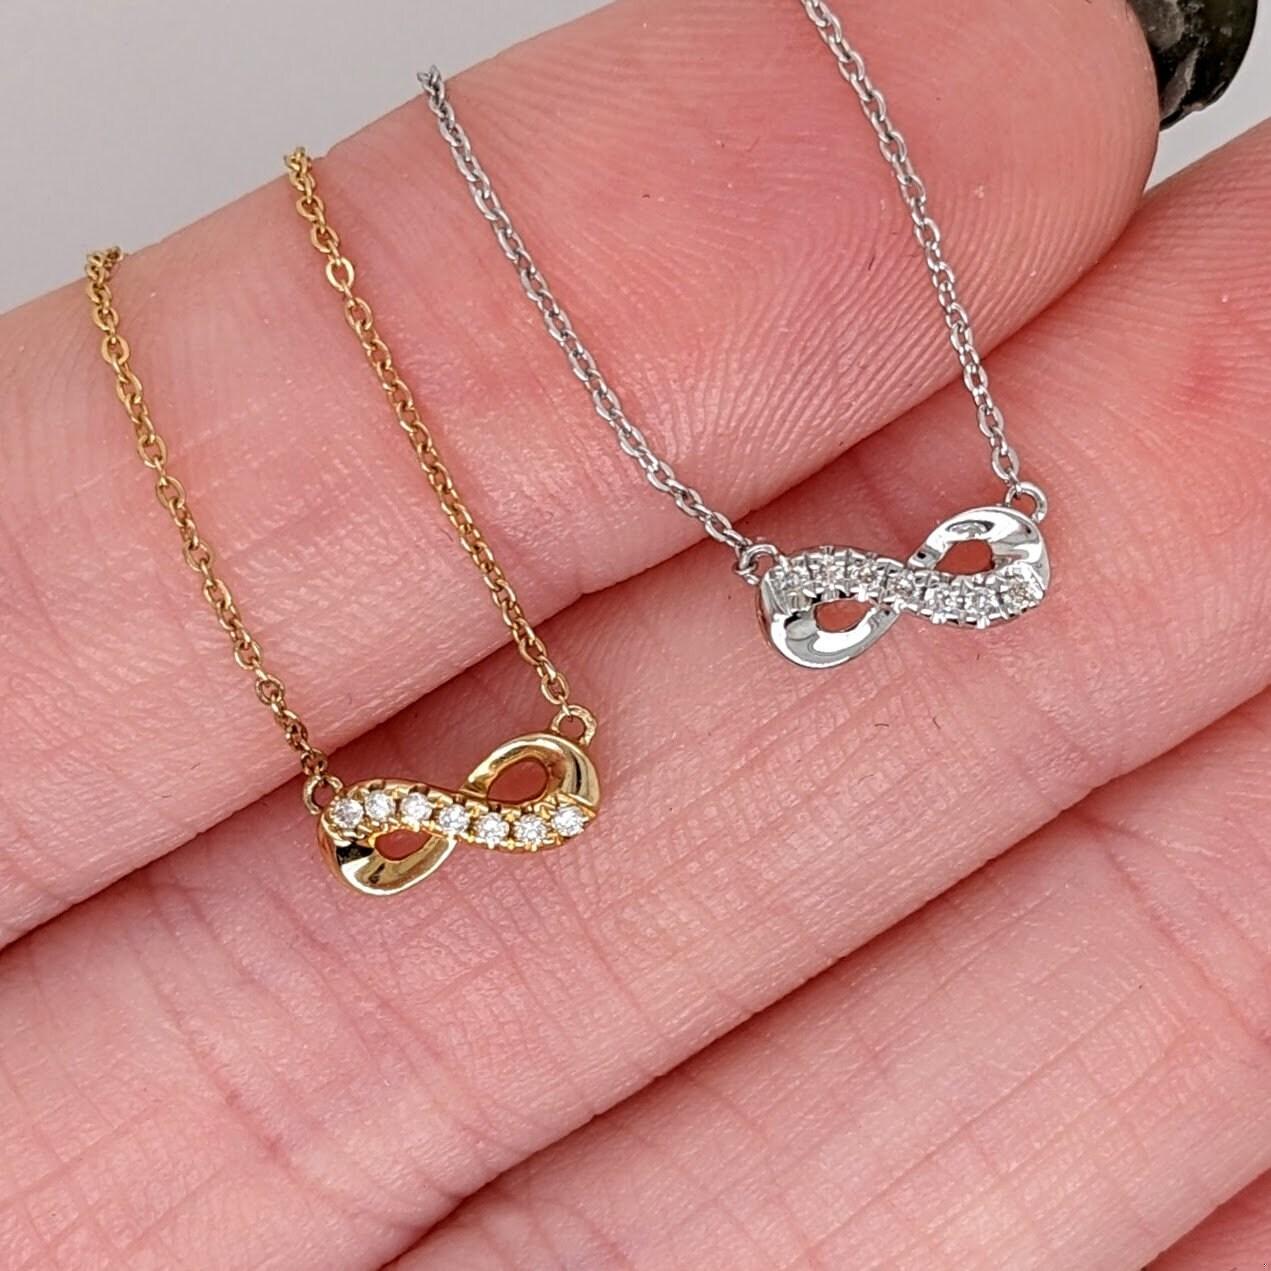 Infinity Sign Pendant in Solid 14k White or Yellow Gold with Natural Diamonds